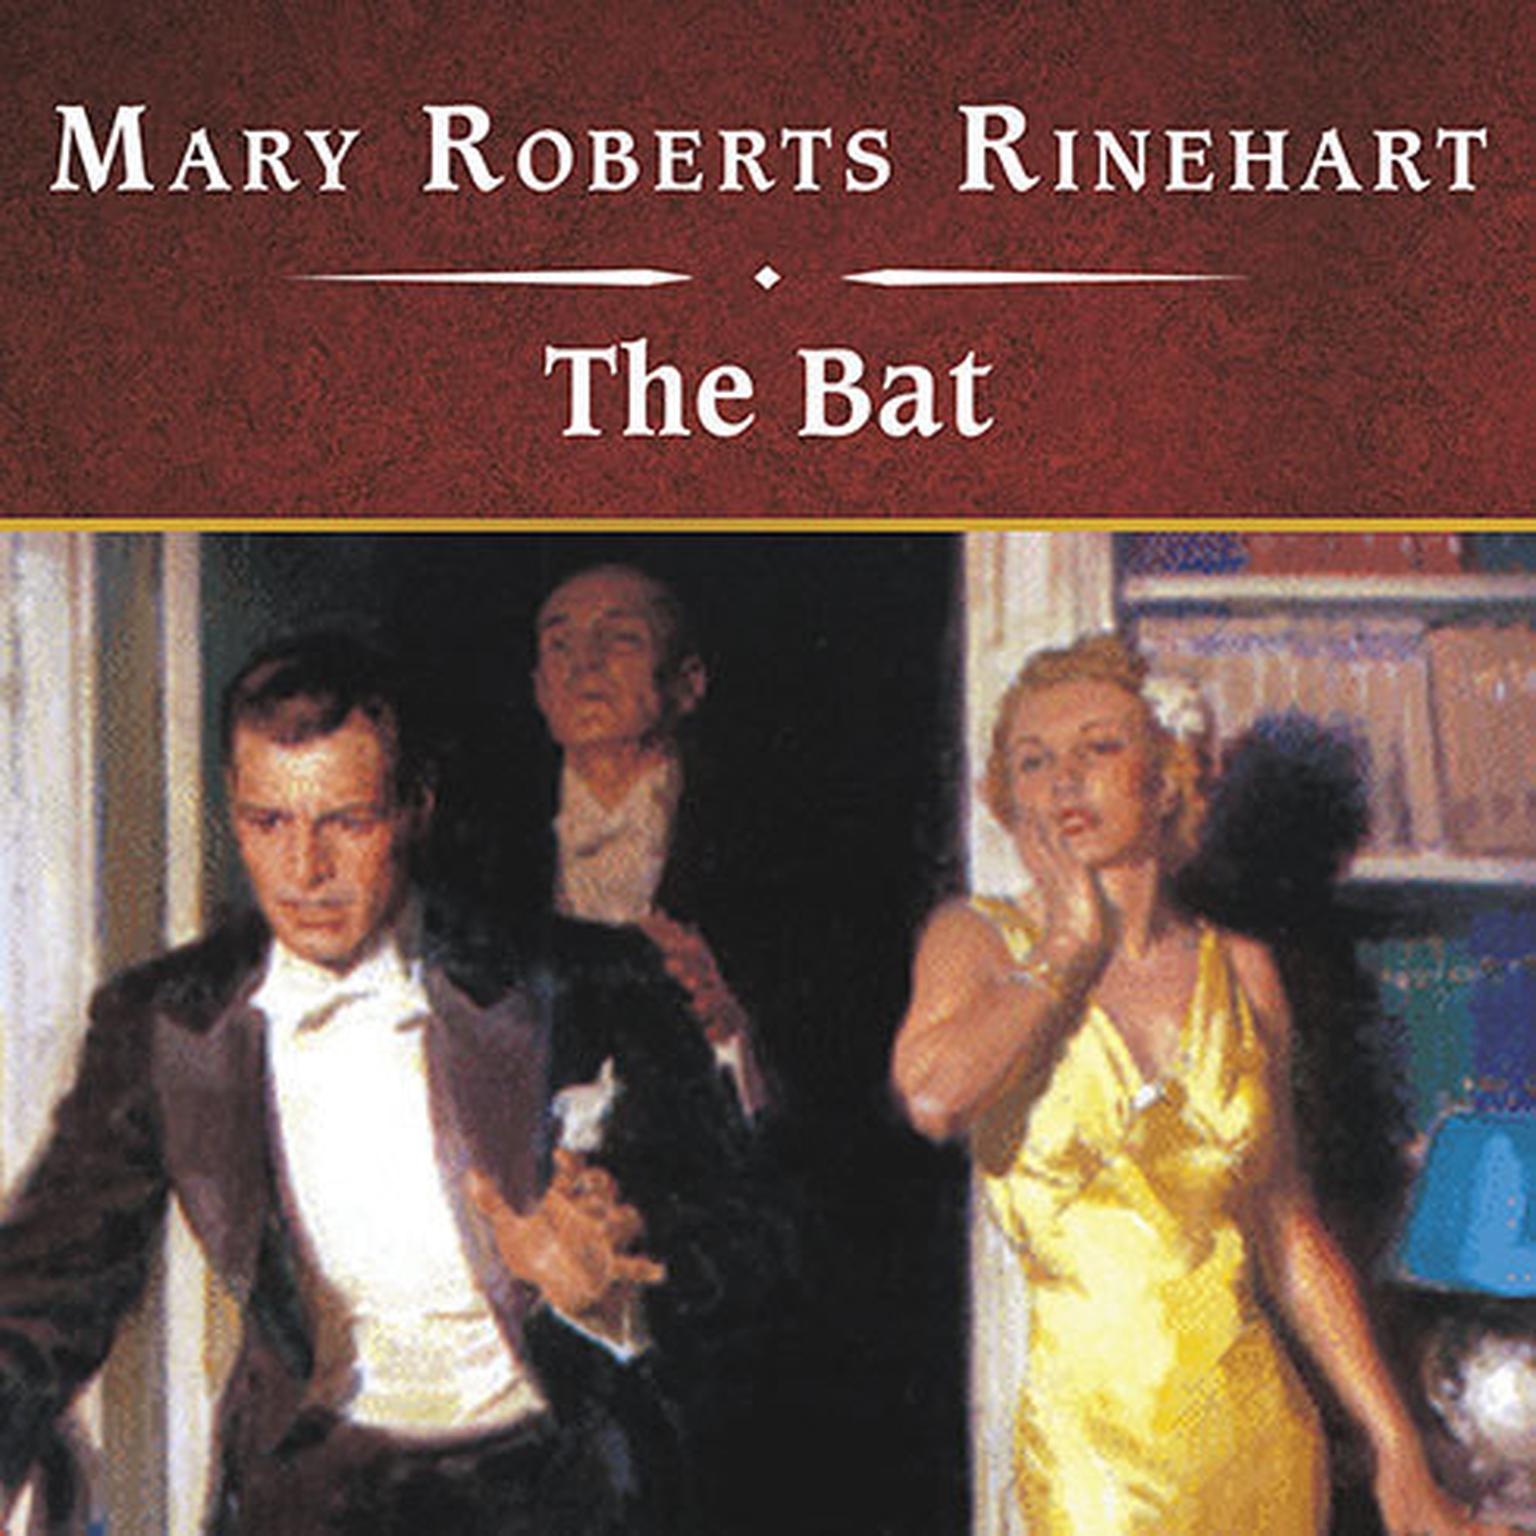 The Bat, with eBook Audiobook, by Mary Roberts Rinehart